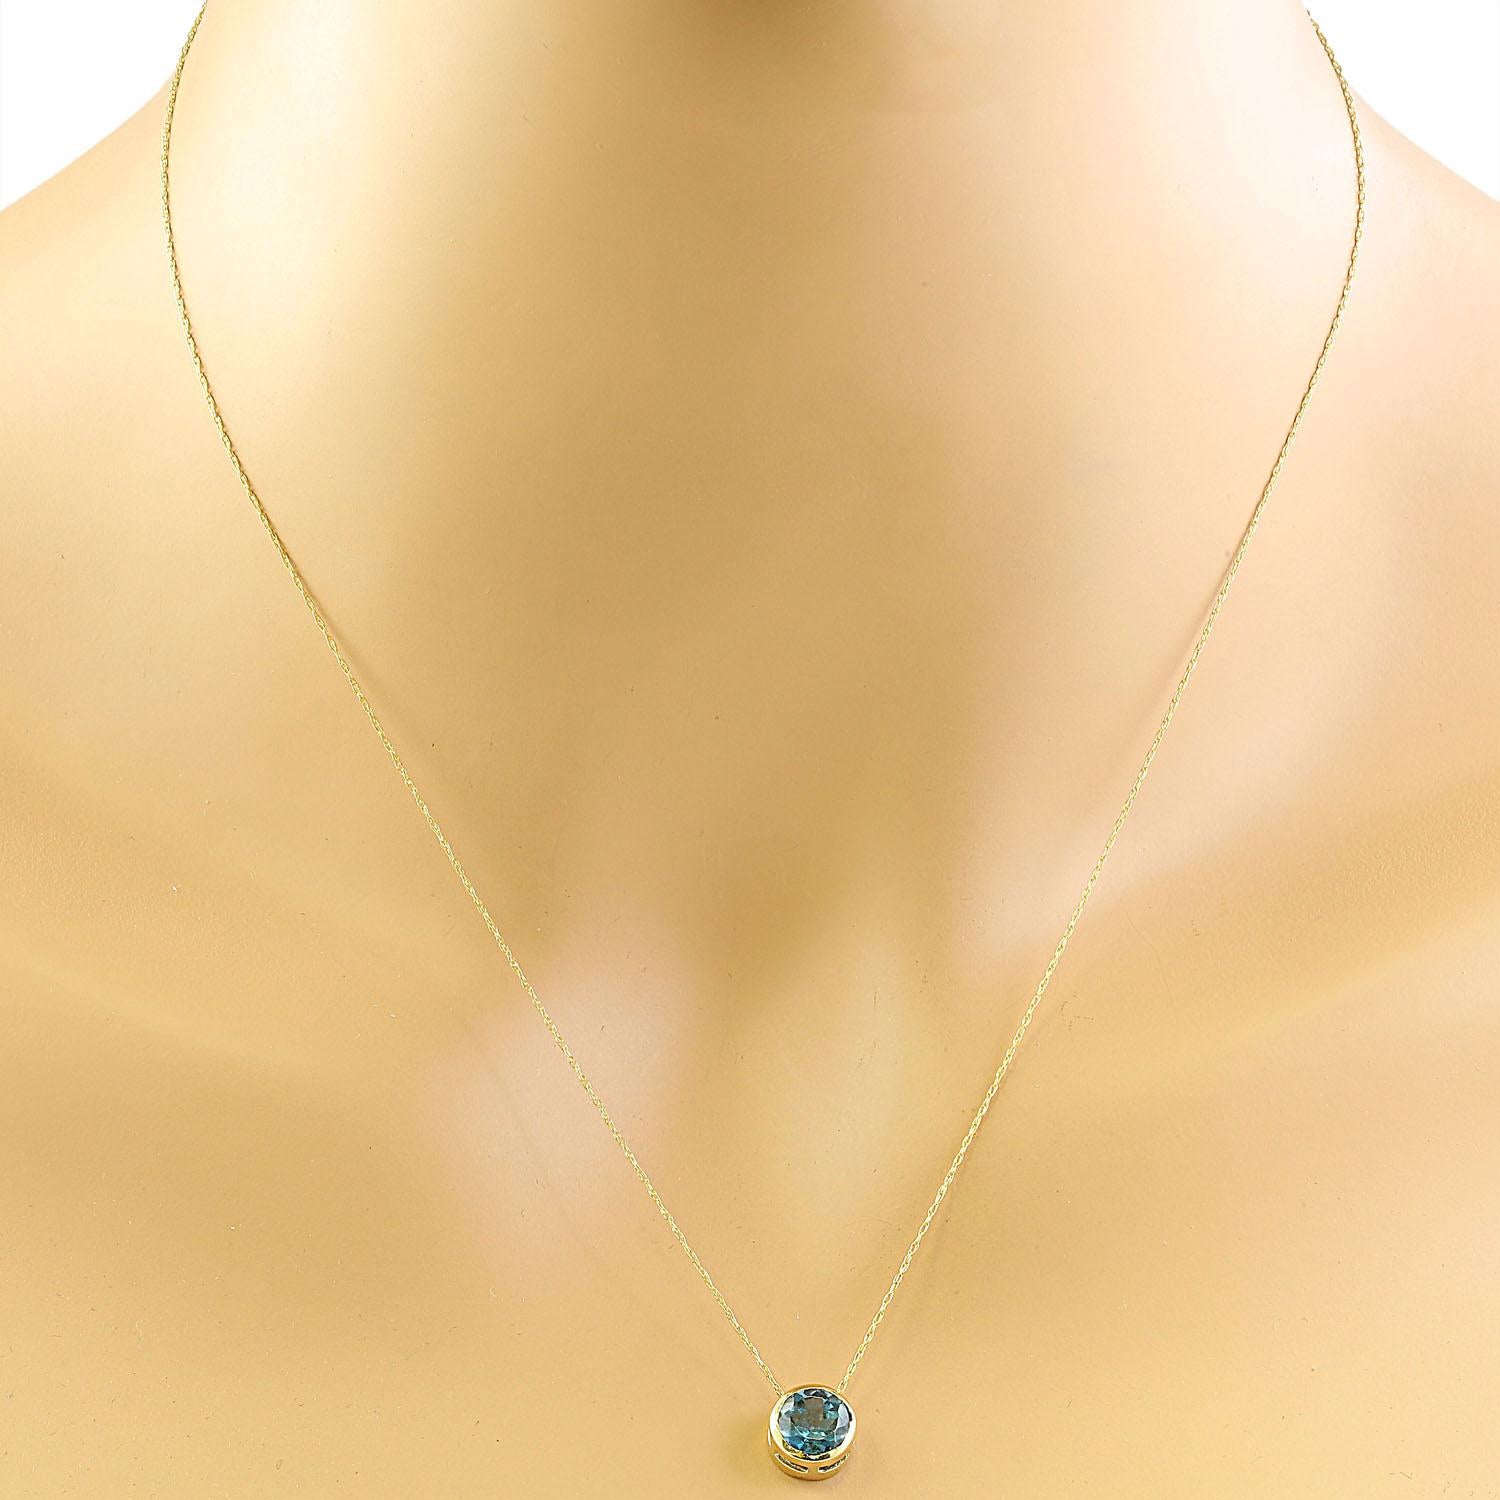 1.50 Carat Lomdon Blue Topaz 14K Yellow Gold Necklace
Stamped: 14K
Total Necklace Weight: 1.4 Grams
Length: 16 Inches
London Blue Topaz Weight: 1.50 Carat (6.50x6.50 Millimeters) 
Face Measures: 8.20x8.20 Millimeters 
SKU: [600195]